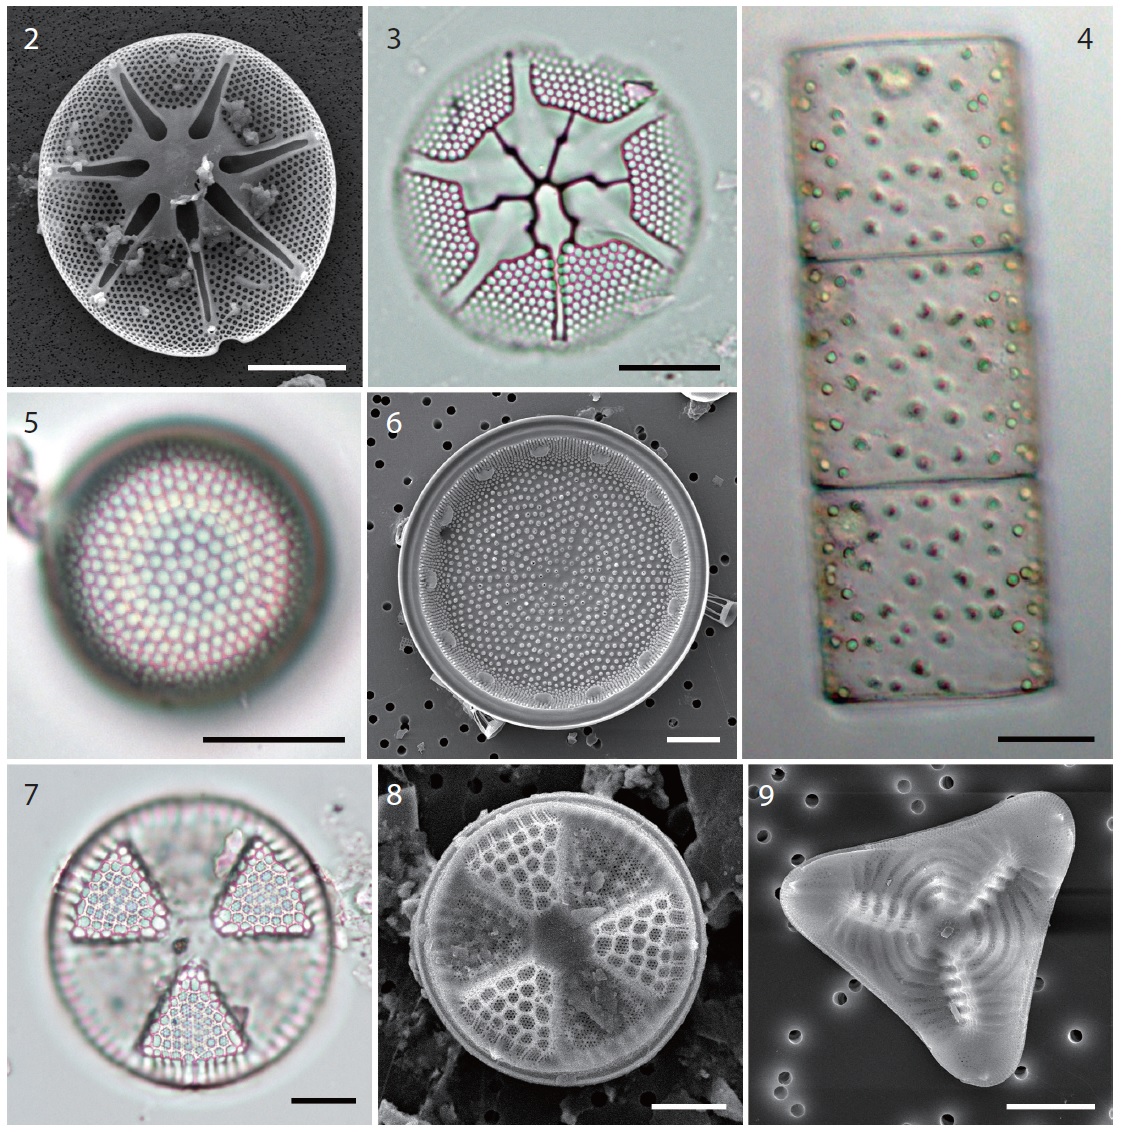 Fig. 2. Internal valve of Asterionellopsis hyalina in SEM. Fig. 3. Asterionellopsis parvula in LM. Fig. 4. Pseudoguinardia recta in LM. Fig. 5. Actinocyclus exiguus in LM. Fig. 6. Internal valve of Actinocyclus sp. Fig. 7. Actinoptychus aster in LM. Fig. 8. External valve of Actinoptychus aster in SEM. Fig. 9. External valve of Schuettia annulata var. minor. Scale bars represent: Figs. 2, 3 & 5？10, 10 μm; Fig. 4, 20 μm.